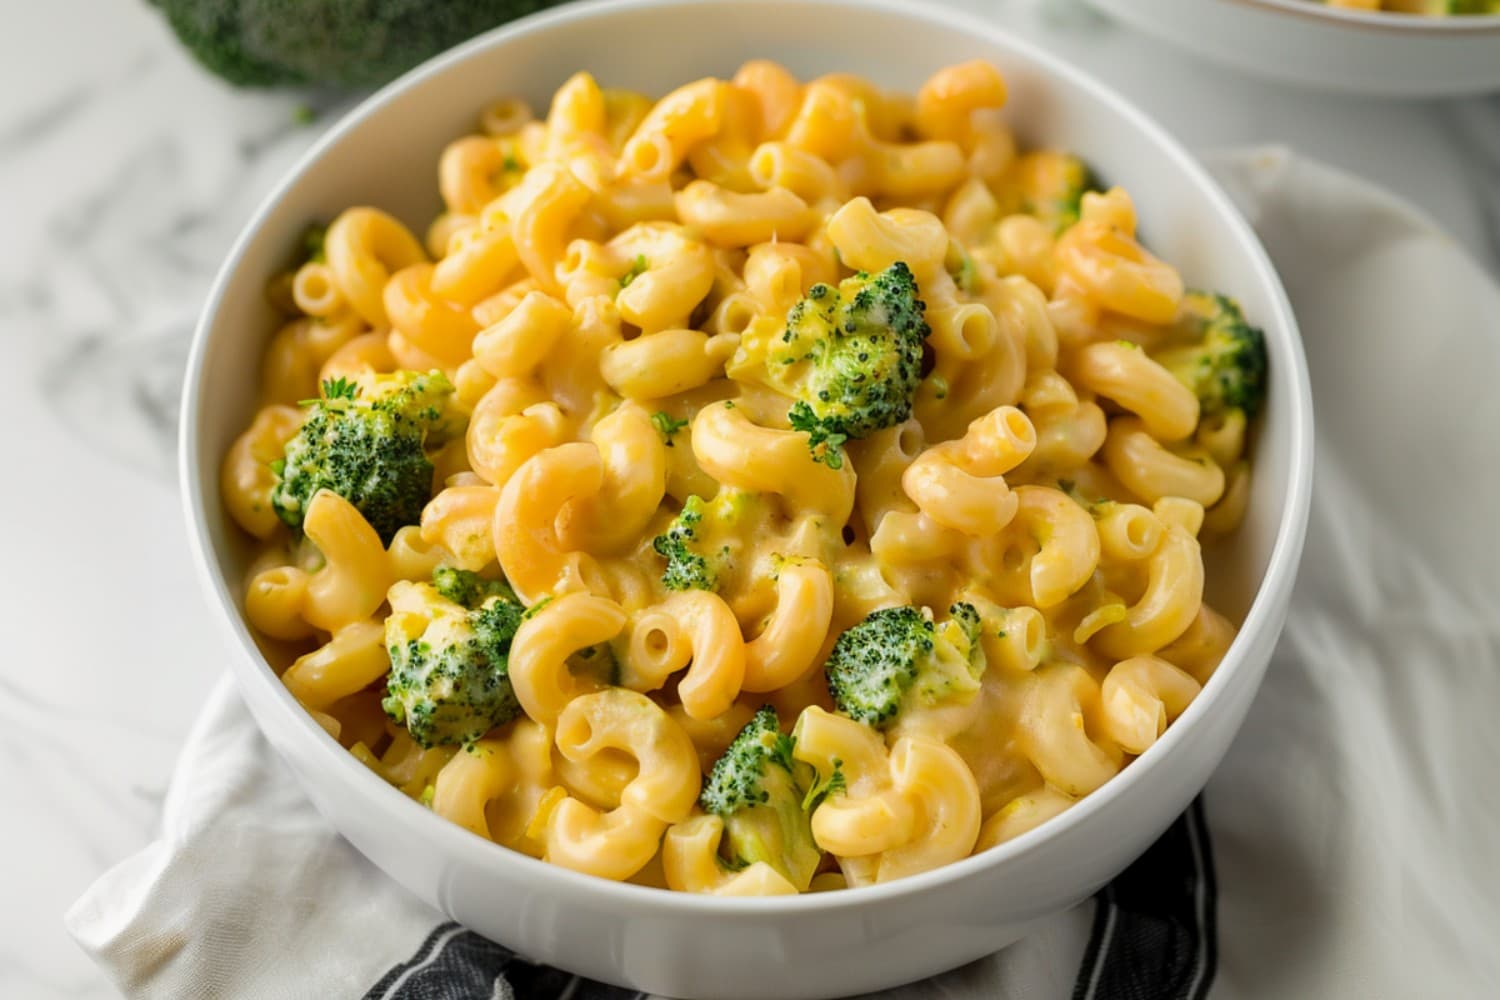 Hearty broccoli cheddar mac and cheese in a white bowl, a satisfying twist on the classic comfort food dish, sure to please the whole family